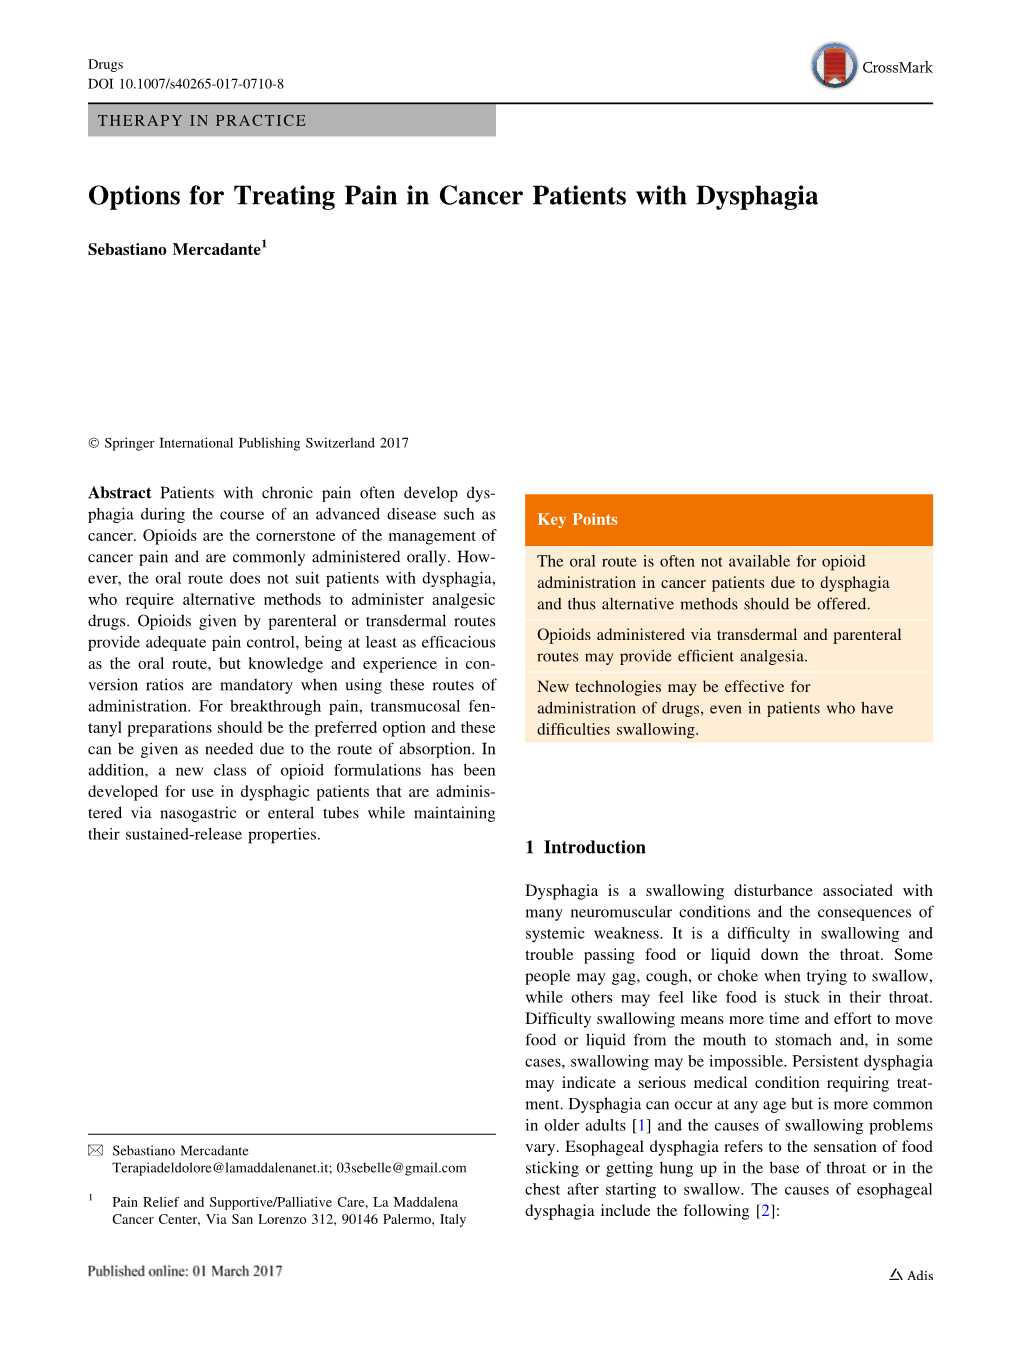 Options for Treating Pain in Cancer Patients with Dysphagia